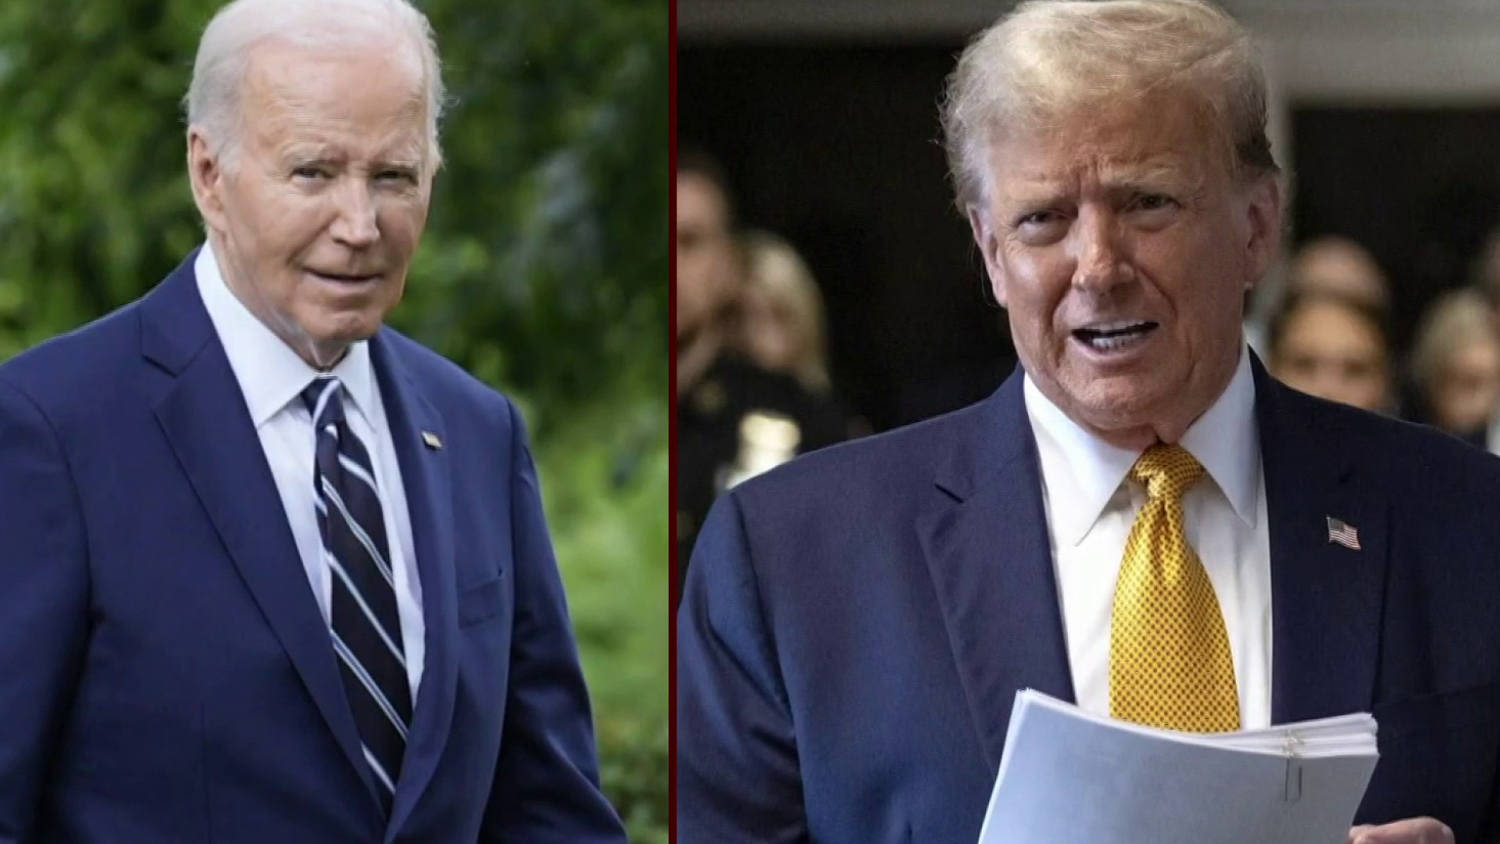 Trump and Biden are close in every swing state, new polling finds